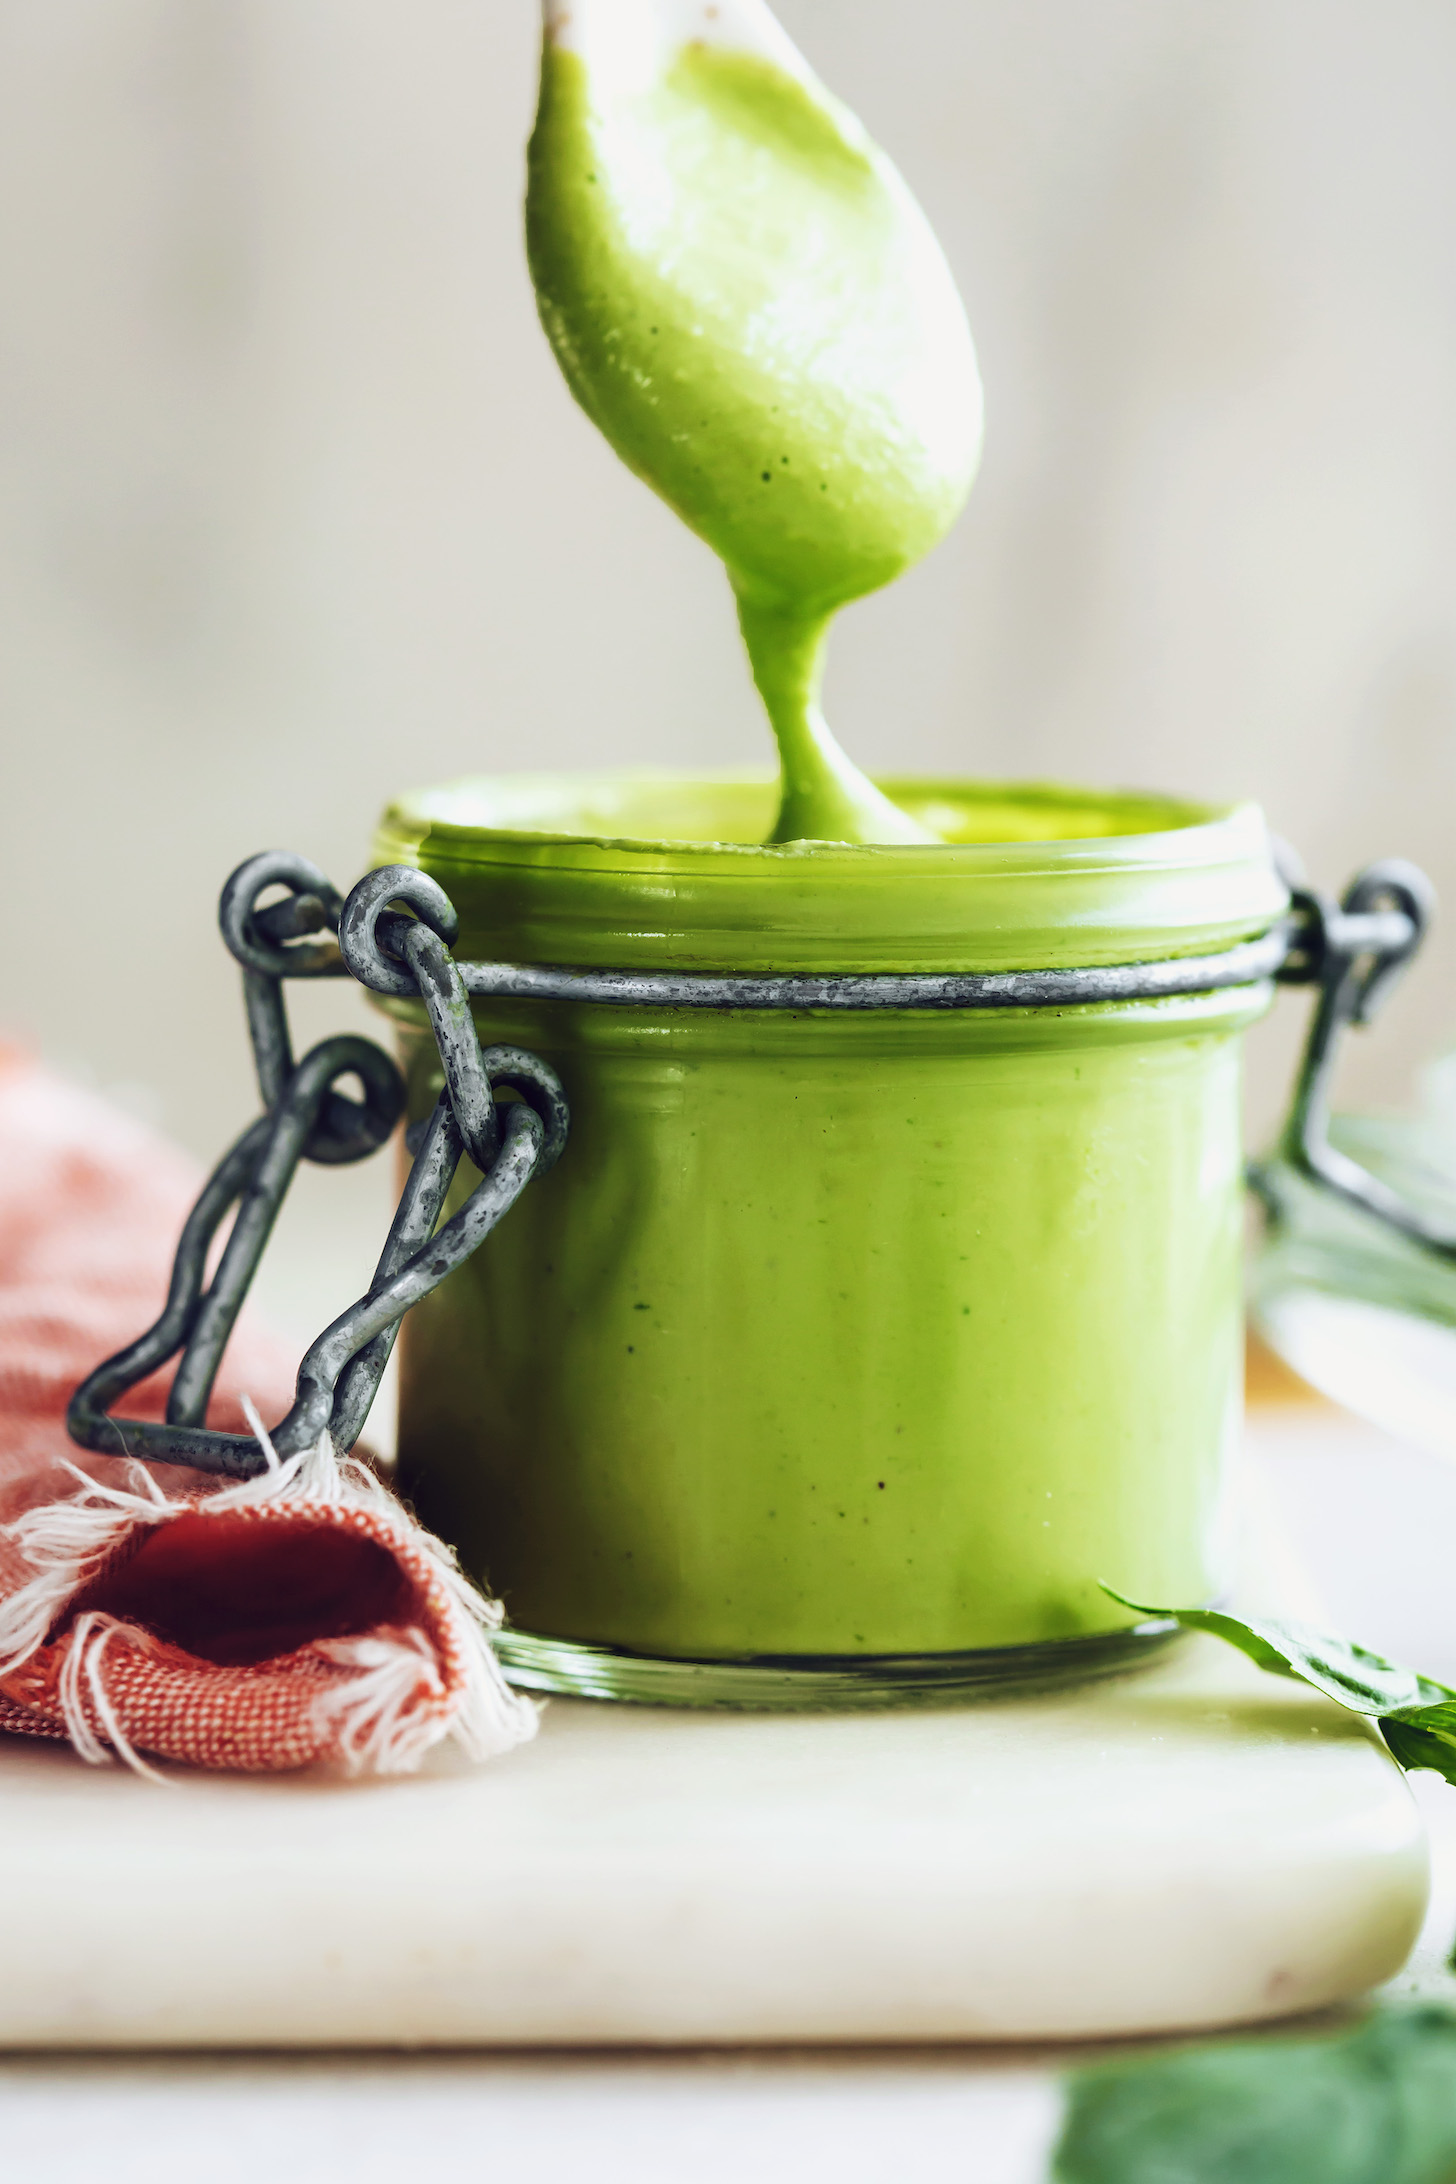 Jar and spoon coated in our green goddess dressing recipe